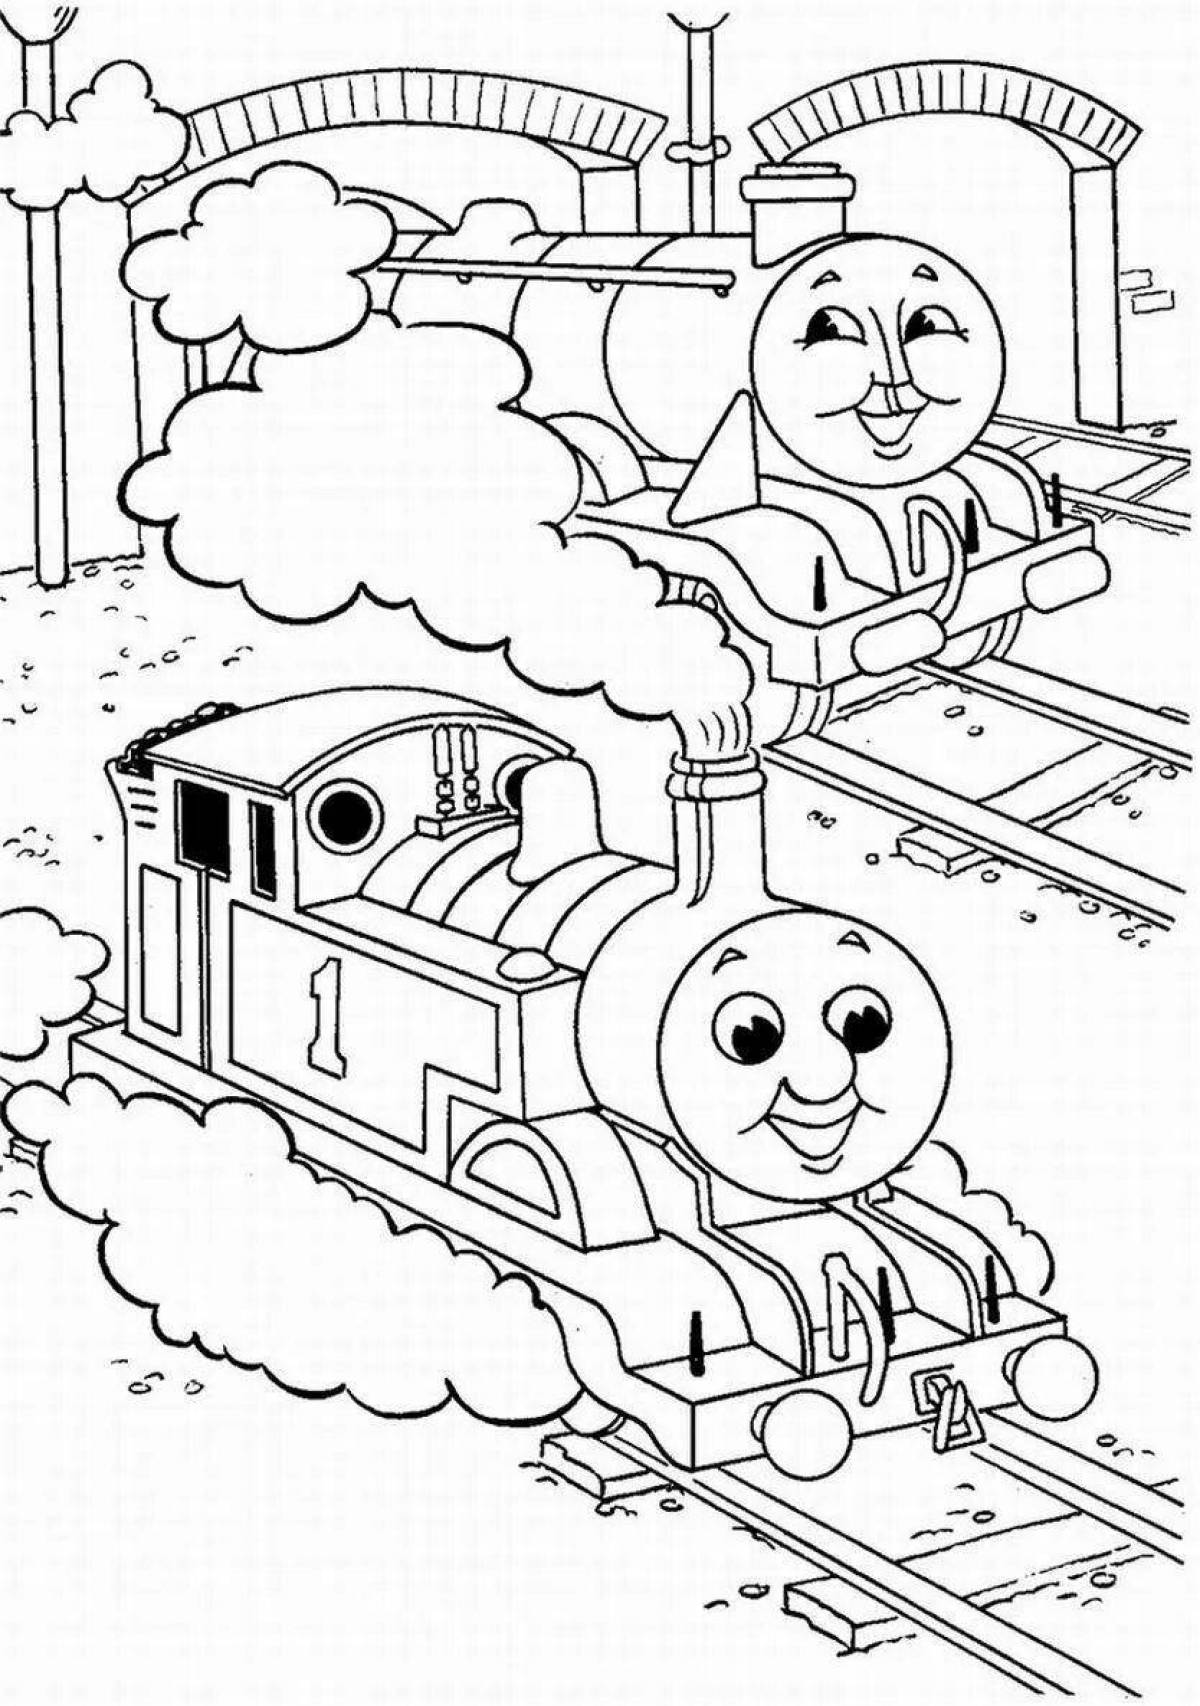 Jolly thomas coloring book for kids